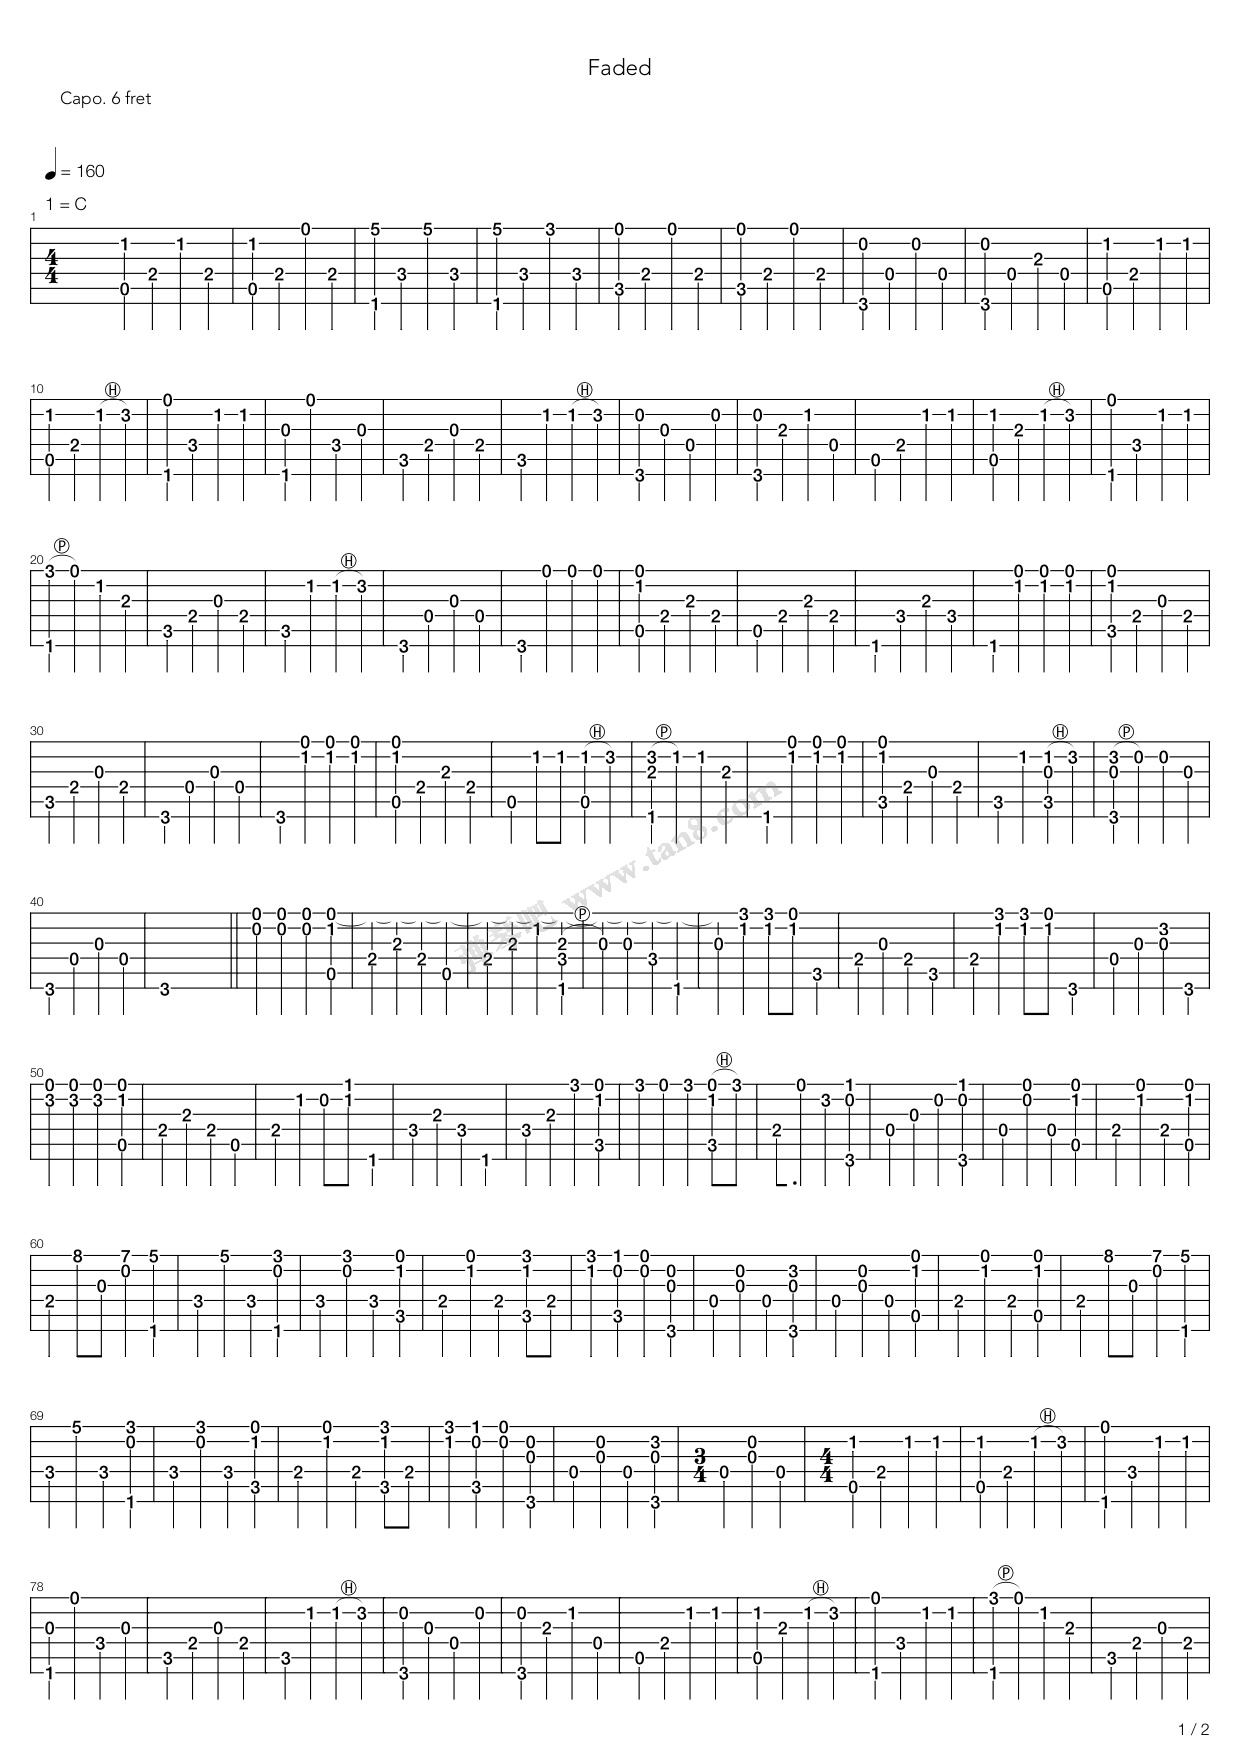 Faded by Alan Walker solo Guitar Tabs Chords Solo Notes Sheet Music Free